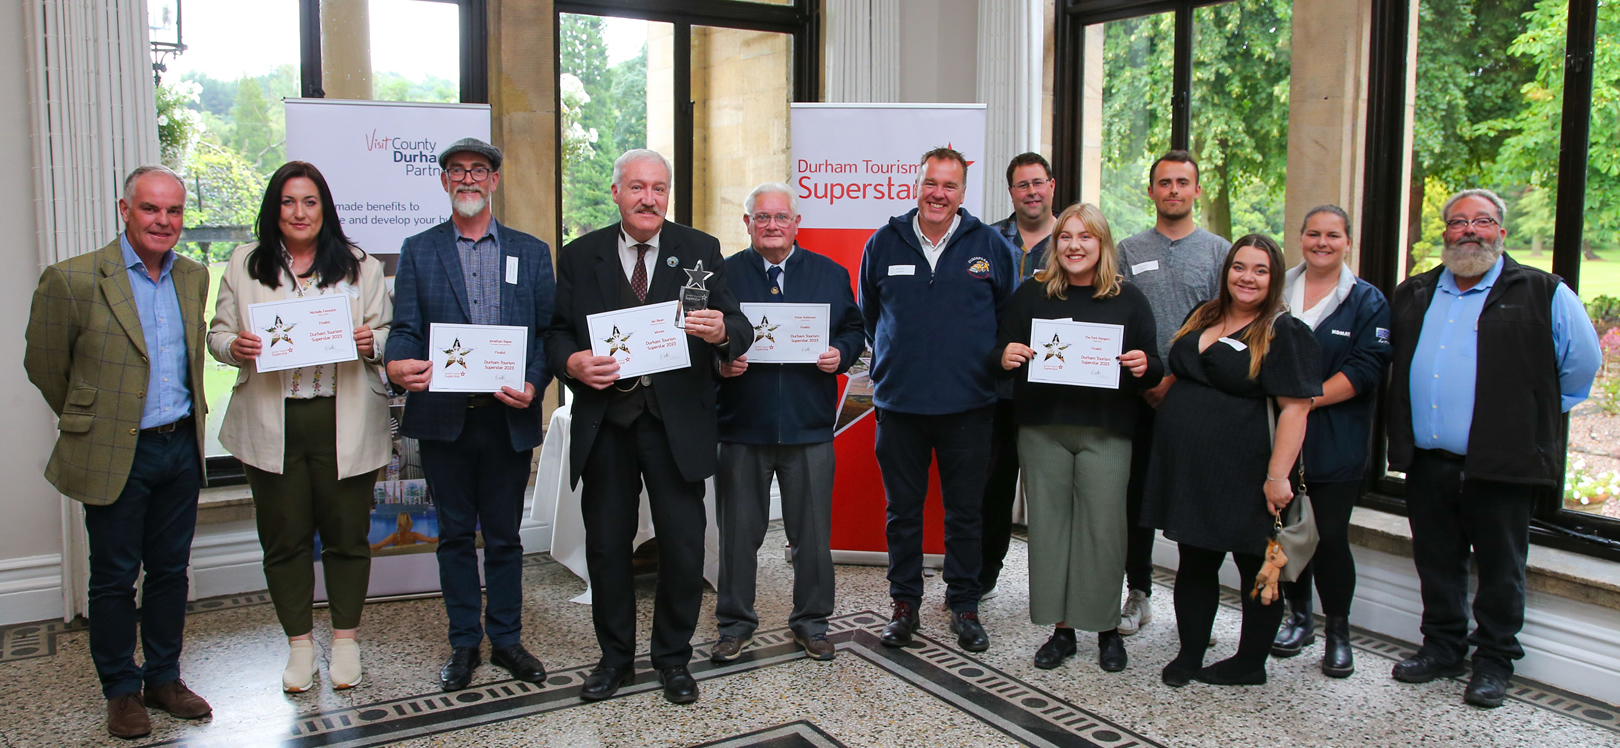 Duncan Peake (Left), Interim Chair of Visit County Durham, with the Durham Tourism Superstar 2023 finalists